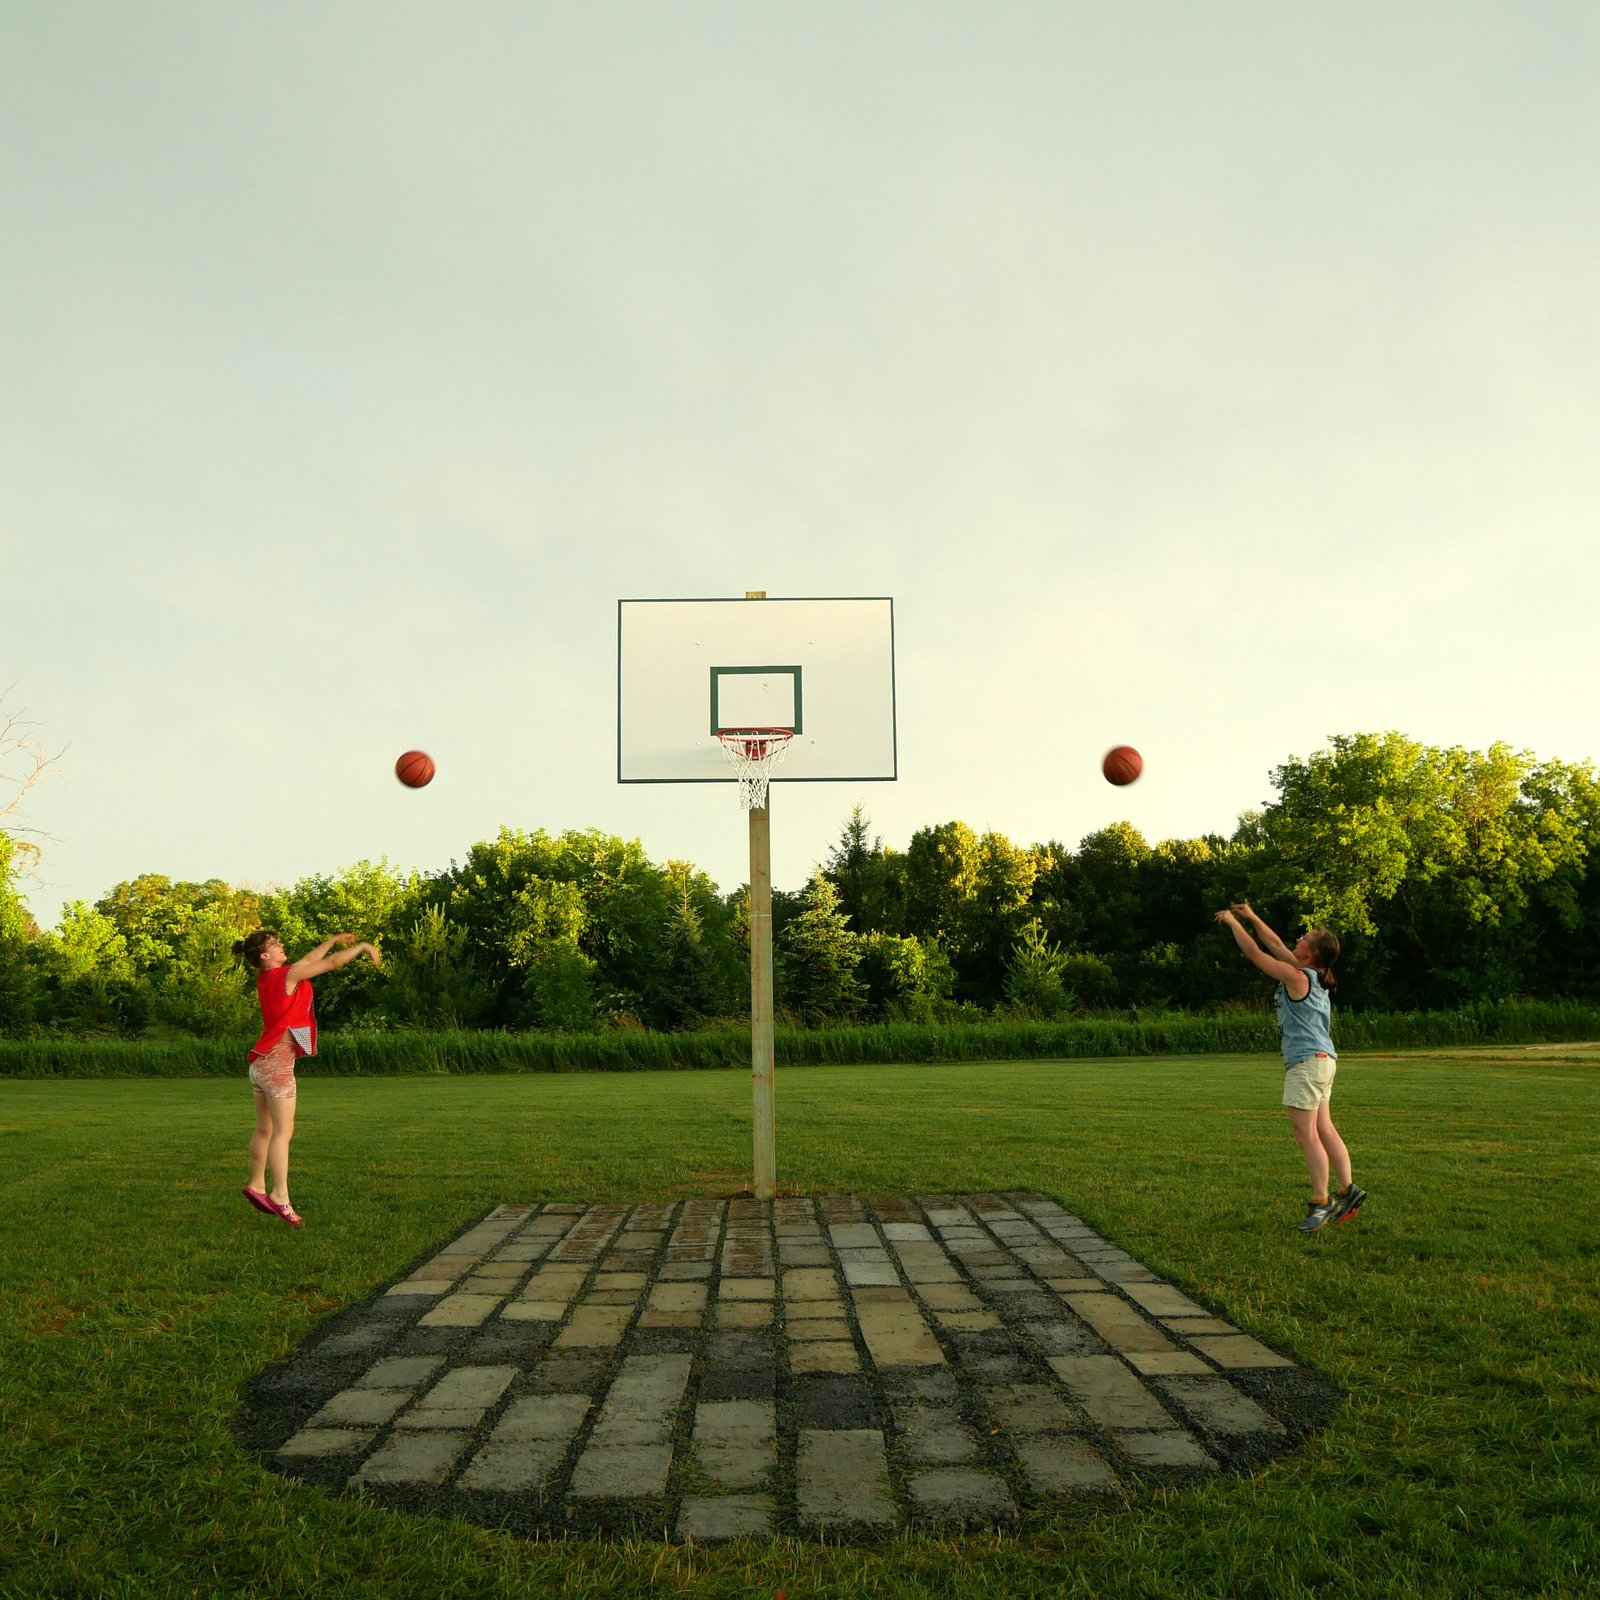 two people shoot basketballs at a hoop against a cloudy sky on a dirtball court 